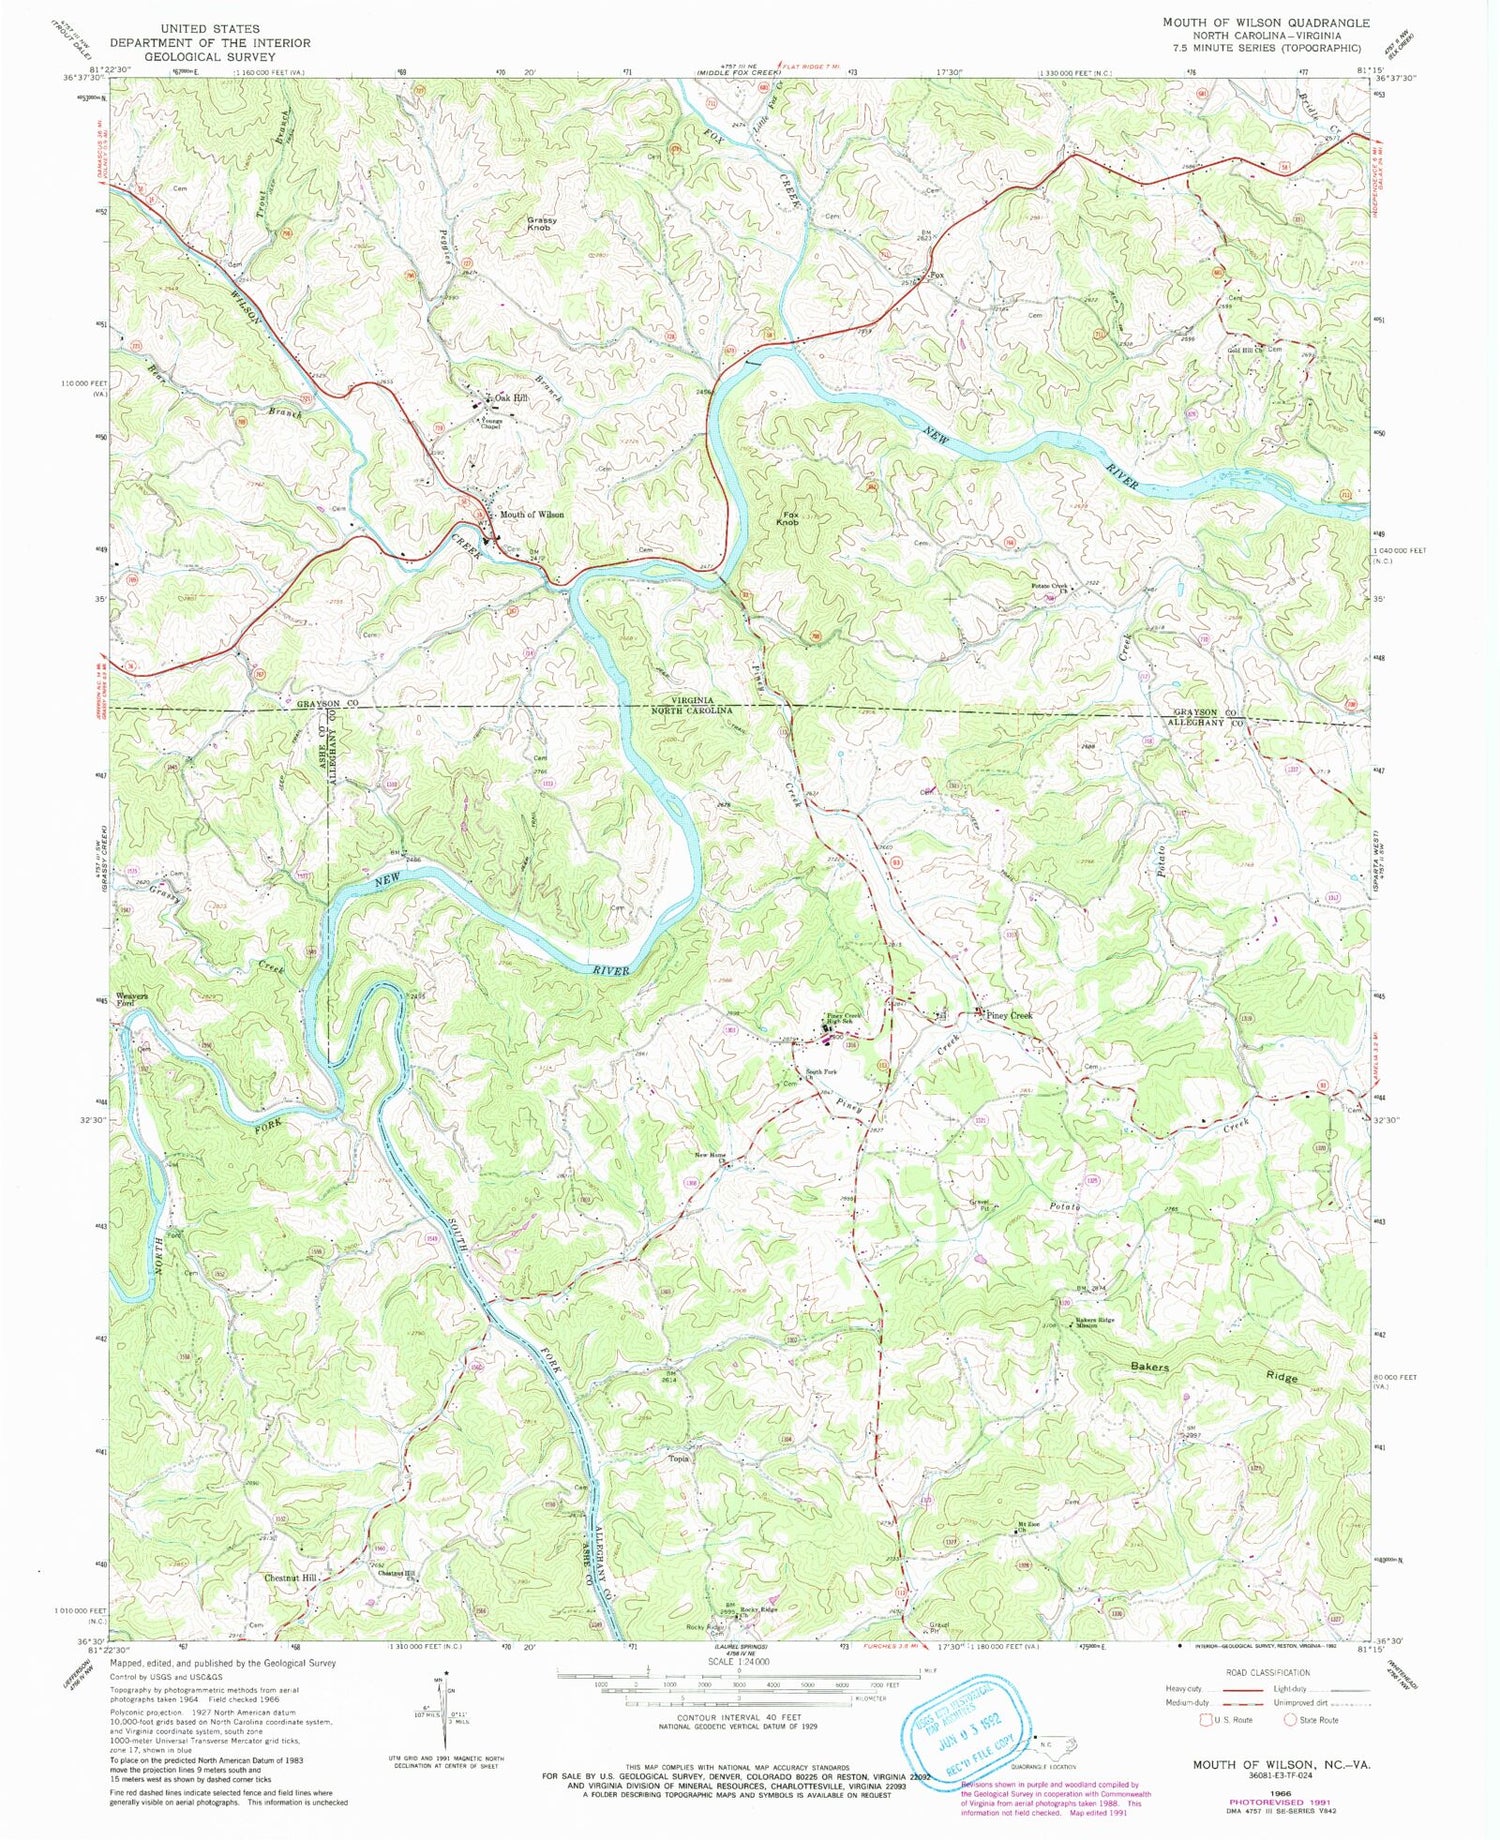 Classic USGS Mouth of Wilson Virginia 7.5'x7.5' Topo Map Image